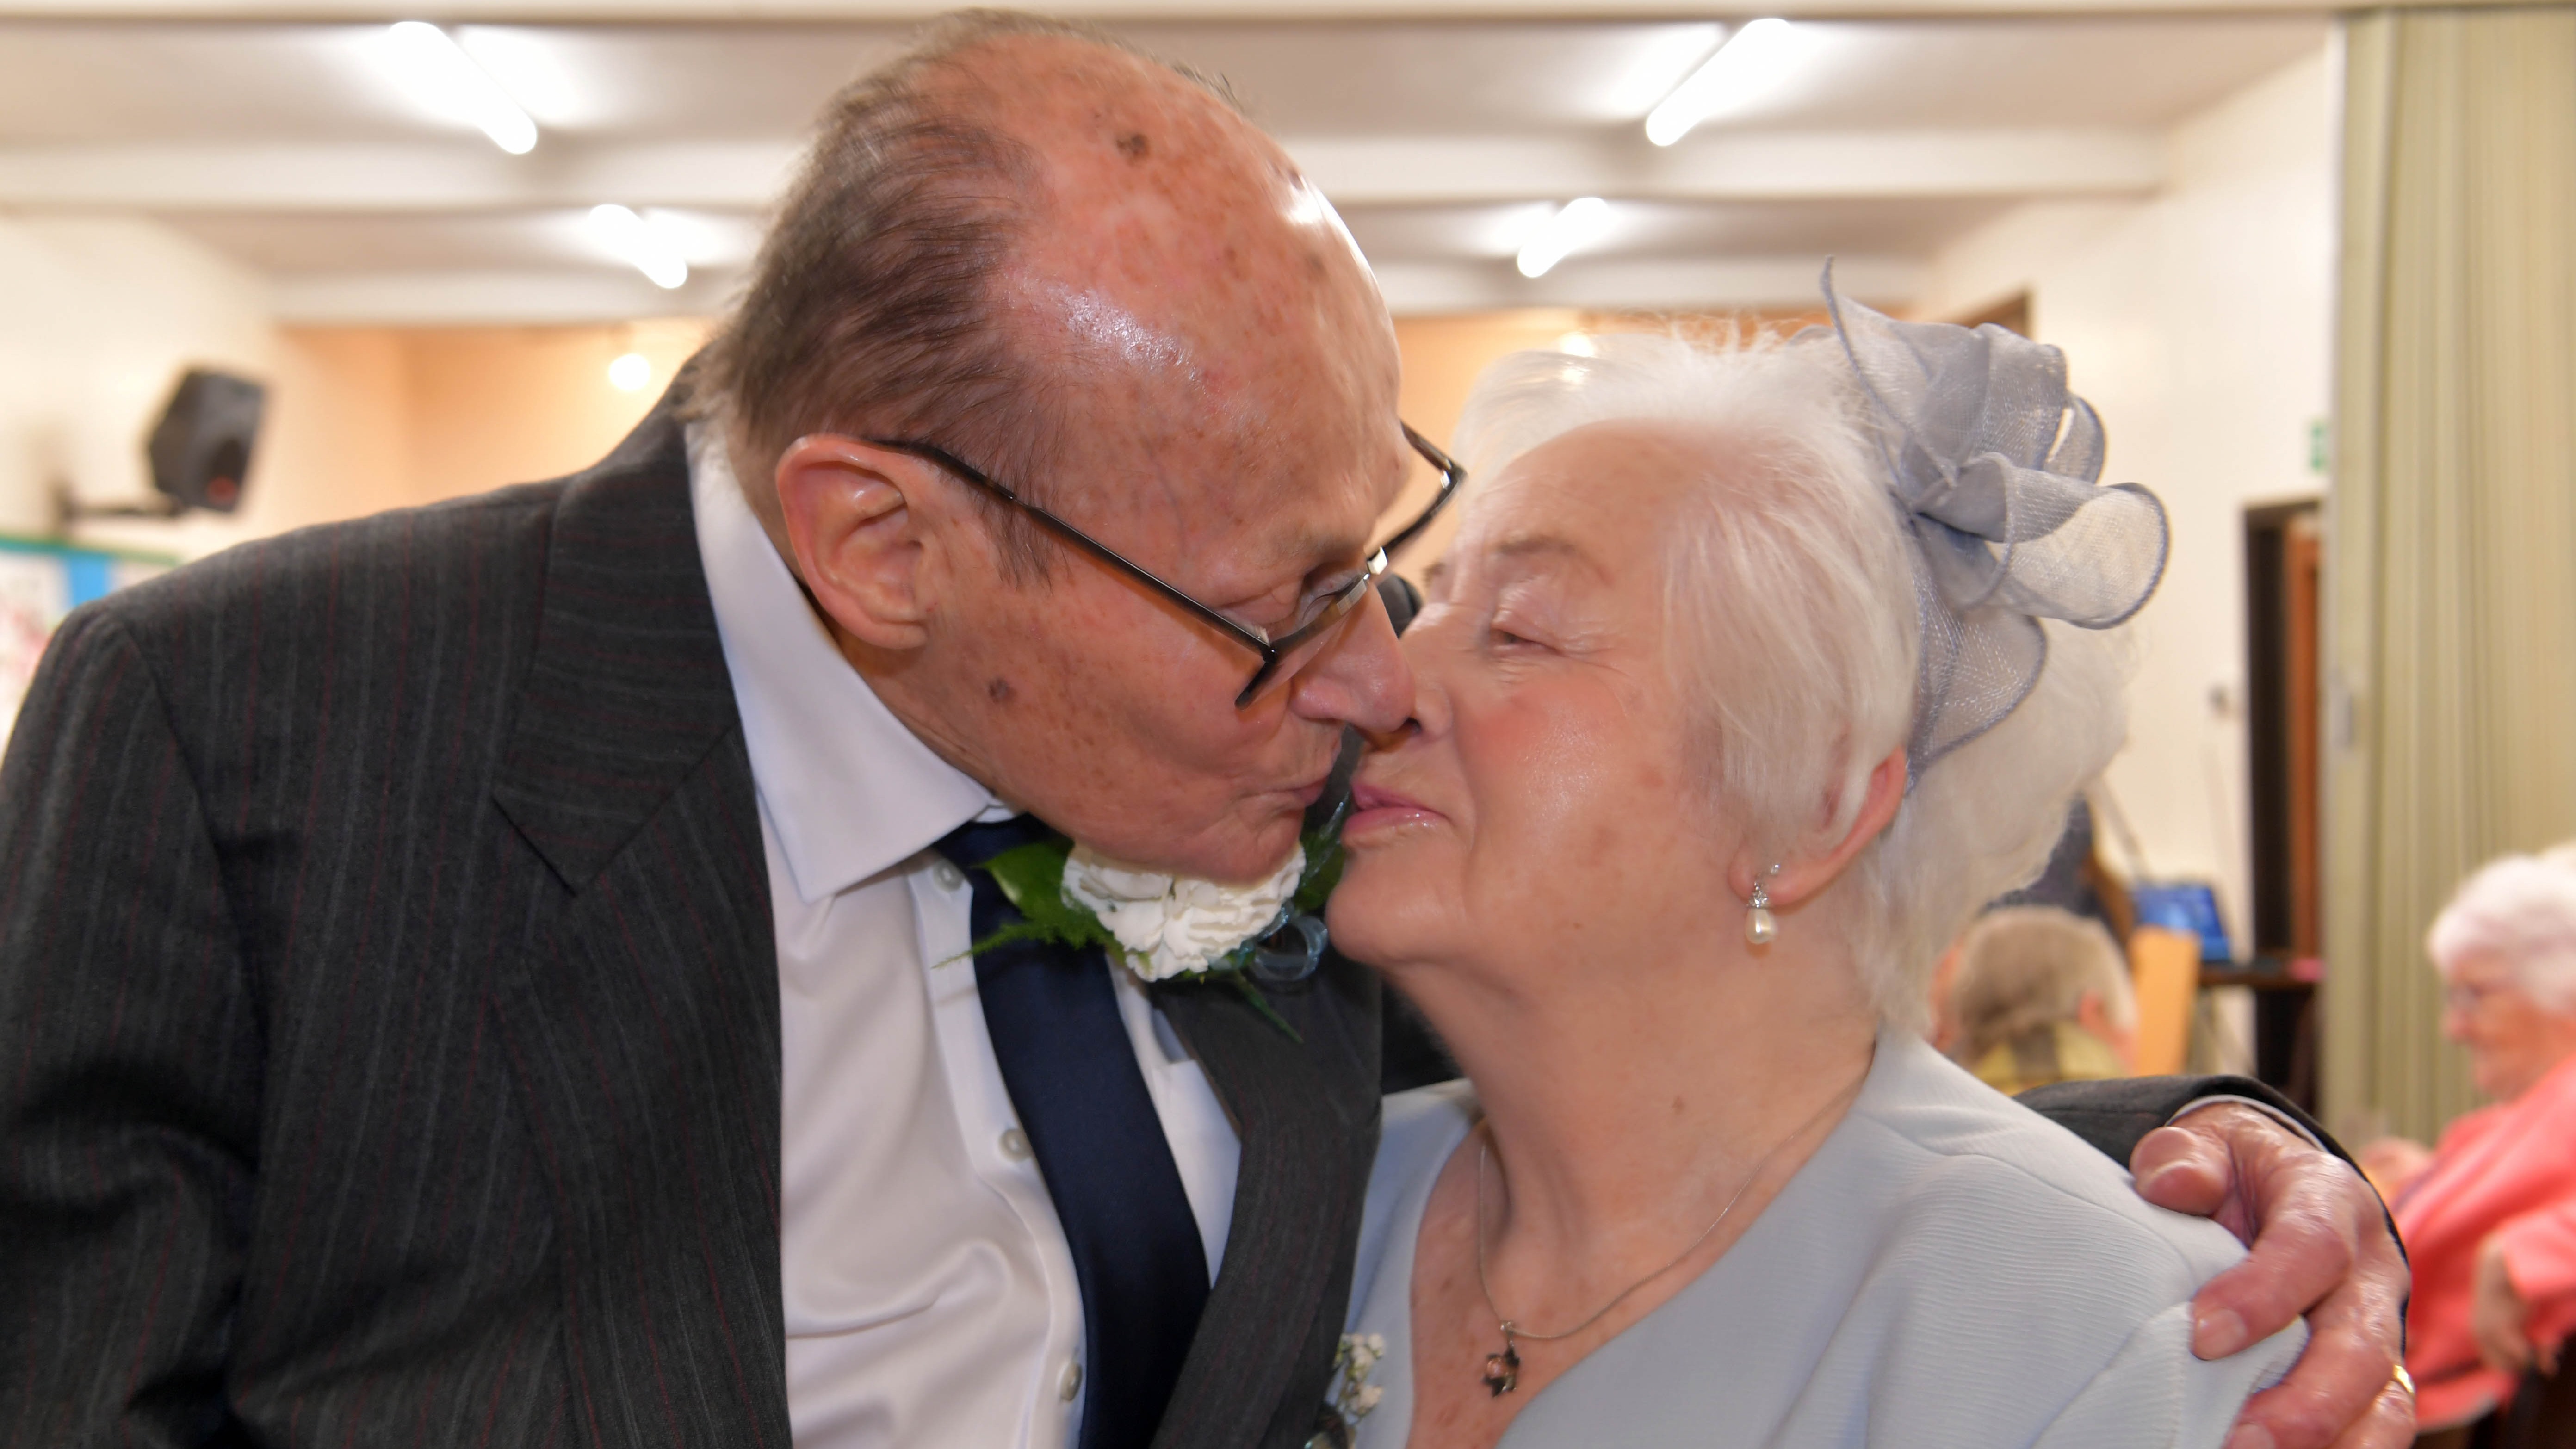 Proving You Are Never Too Old To Find Love 95 Year Old Man Gets Married For First Time To Bride